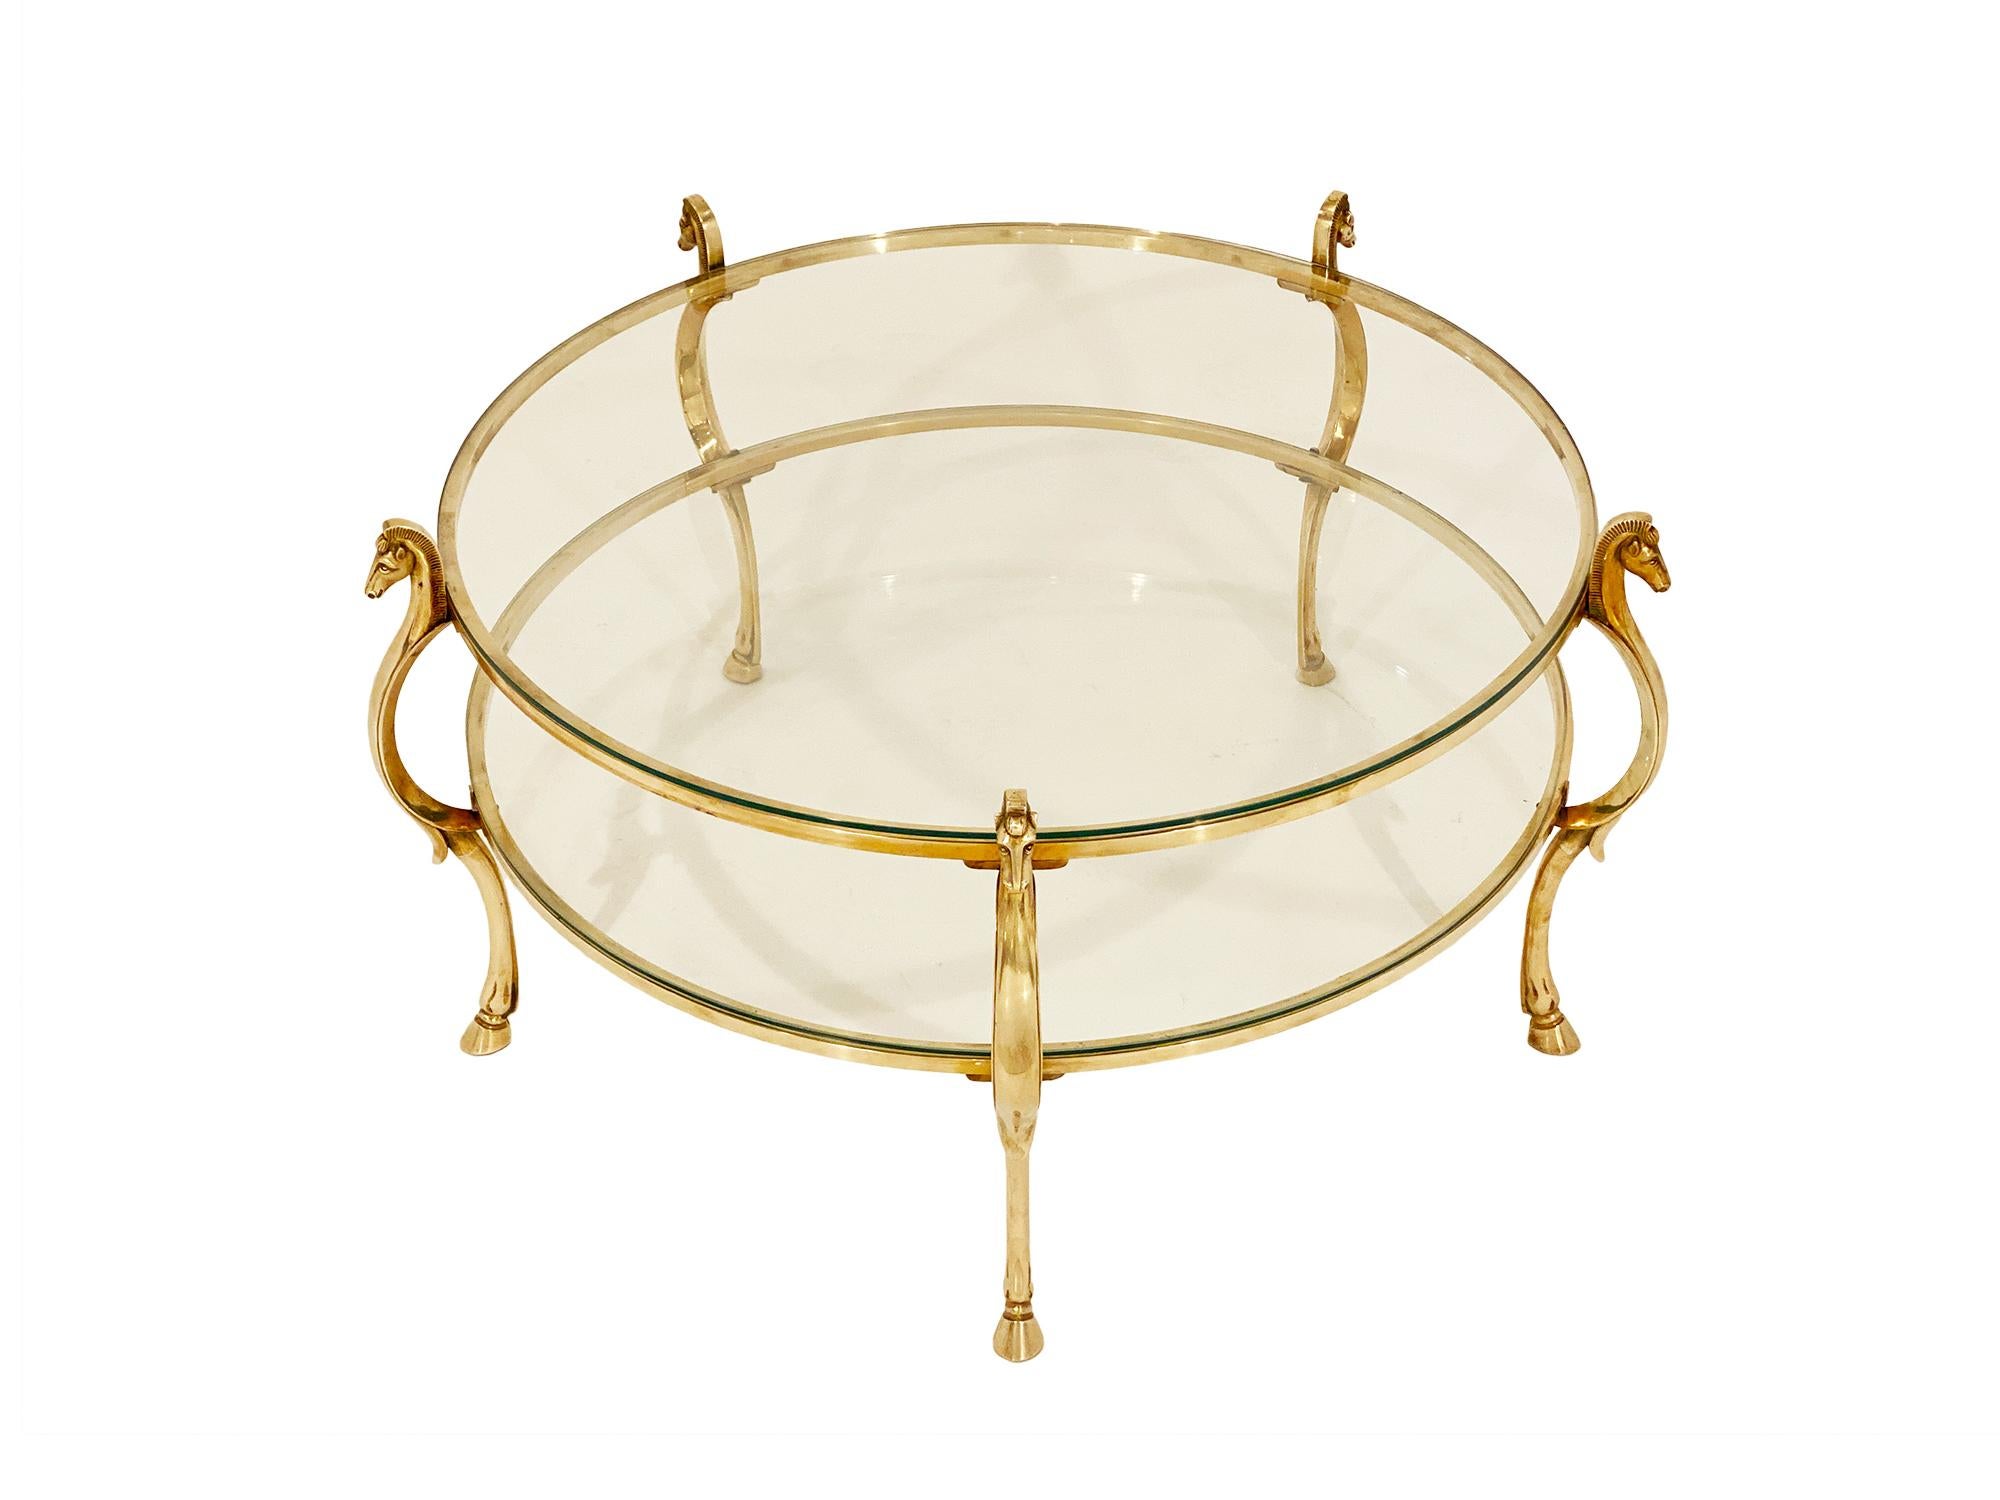 Maison Charles coffee table made of solid brass and featuring five stylized “A l'Etrusco” horses with finely cast details (hooves, heads). This piece made by the iconic midcentury Parisian company Maison Charles is in excellent vintage condition.